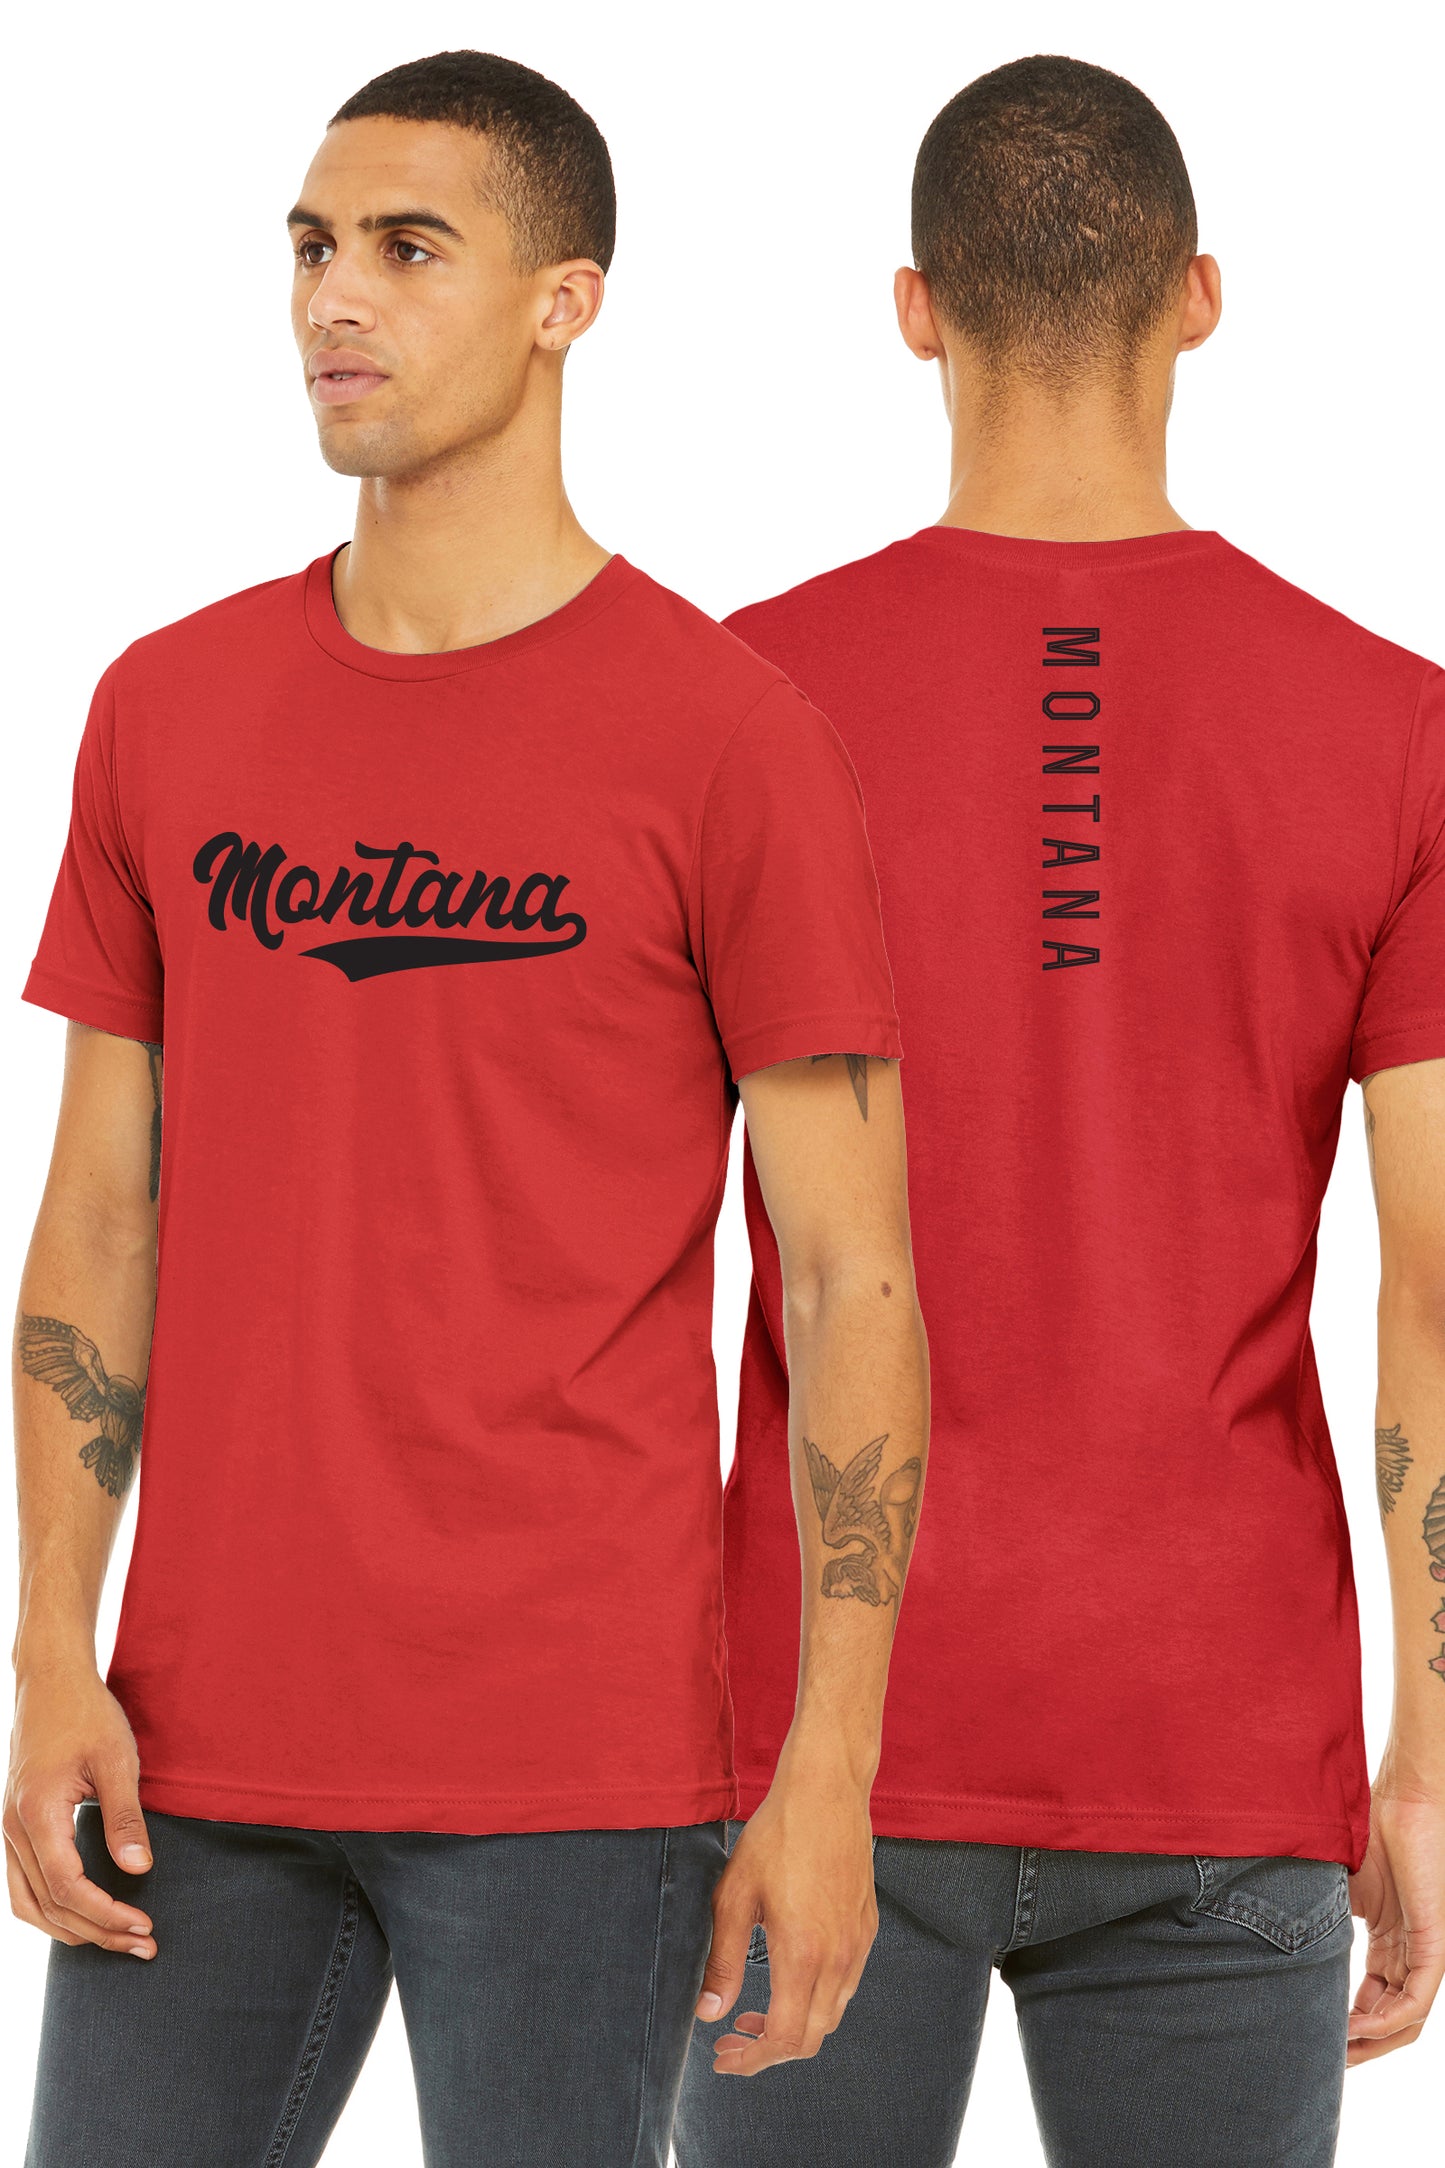 Daxton Adult Unisex Tshirt Montana Scrip with Vertical on the Back